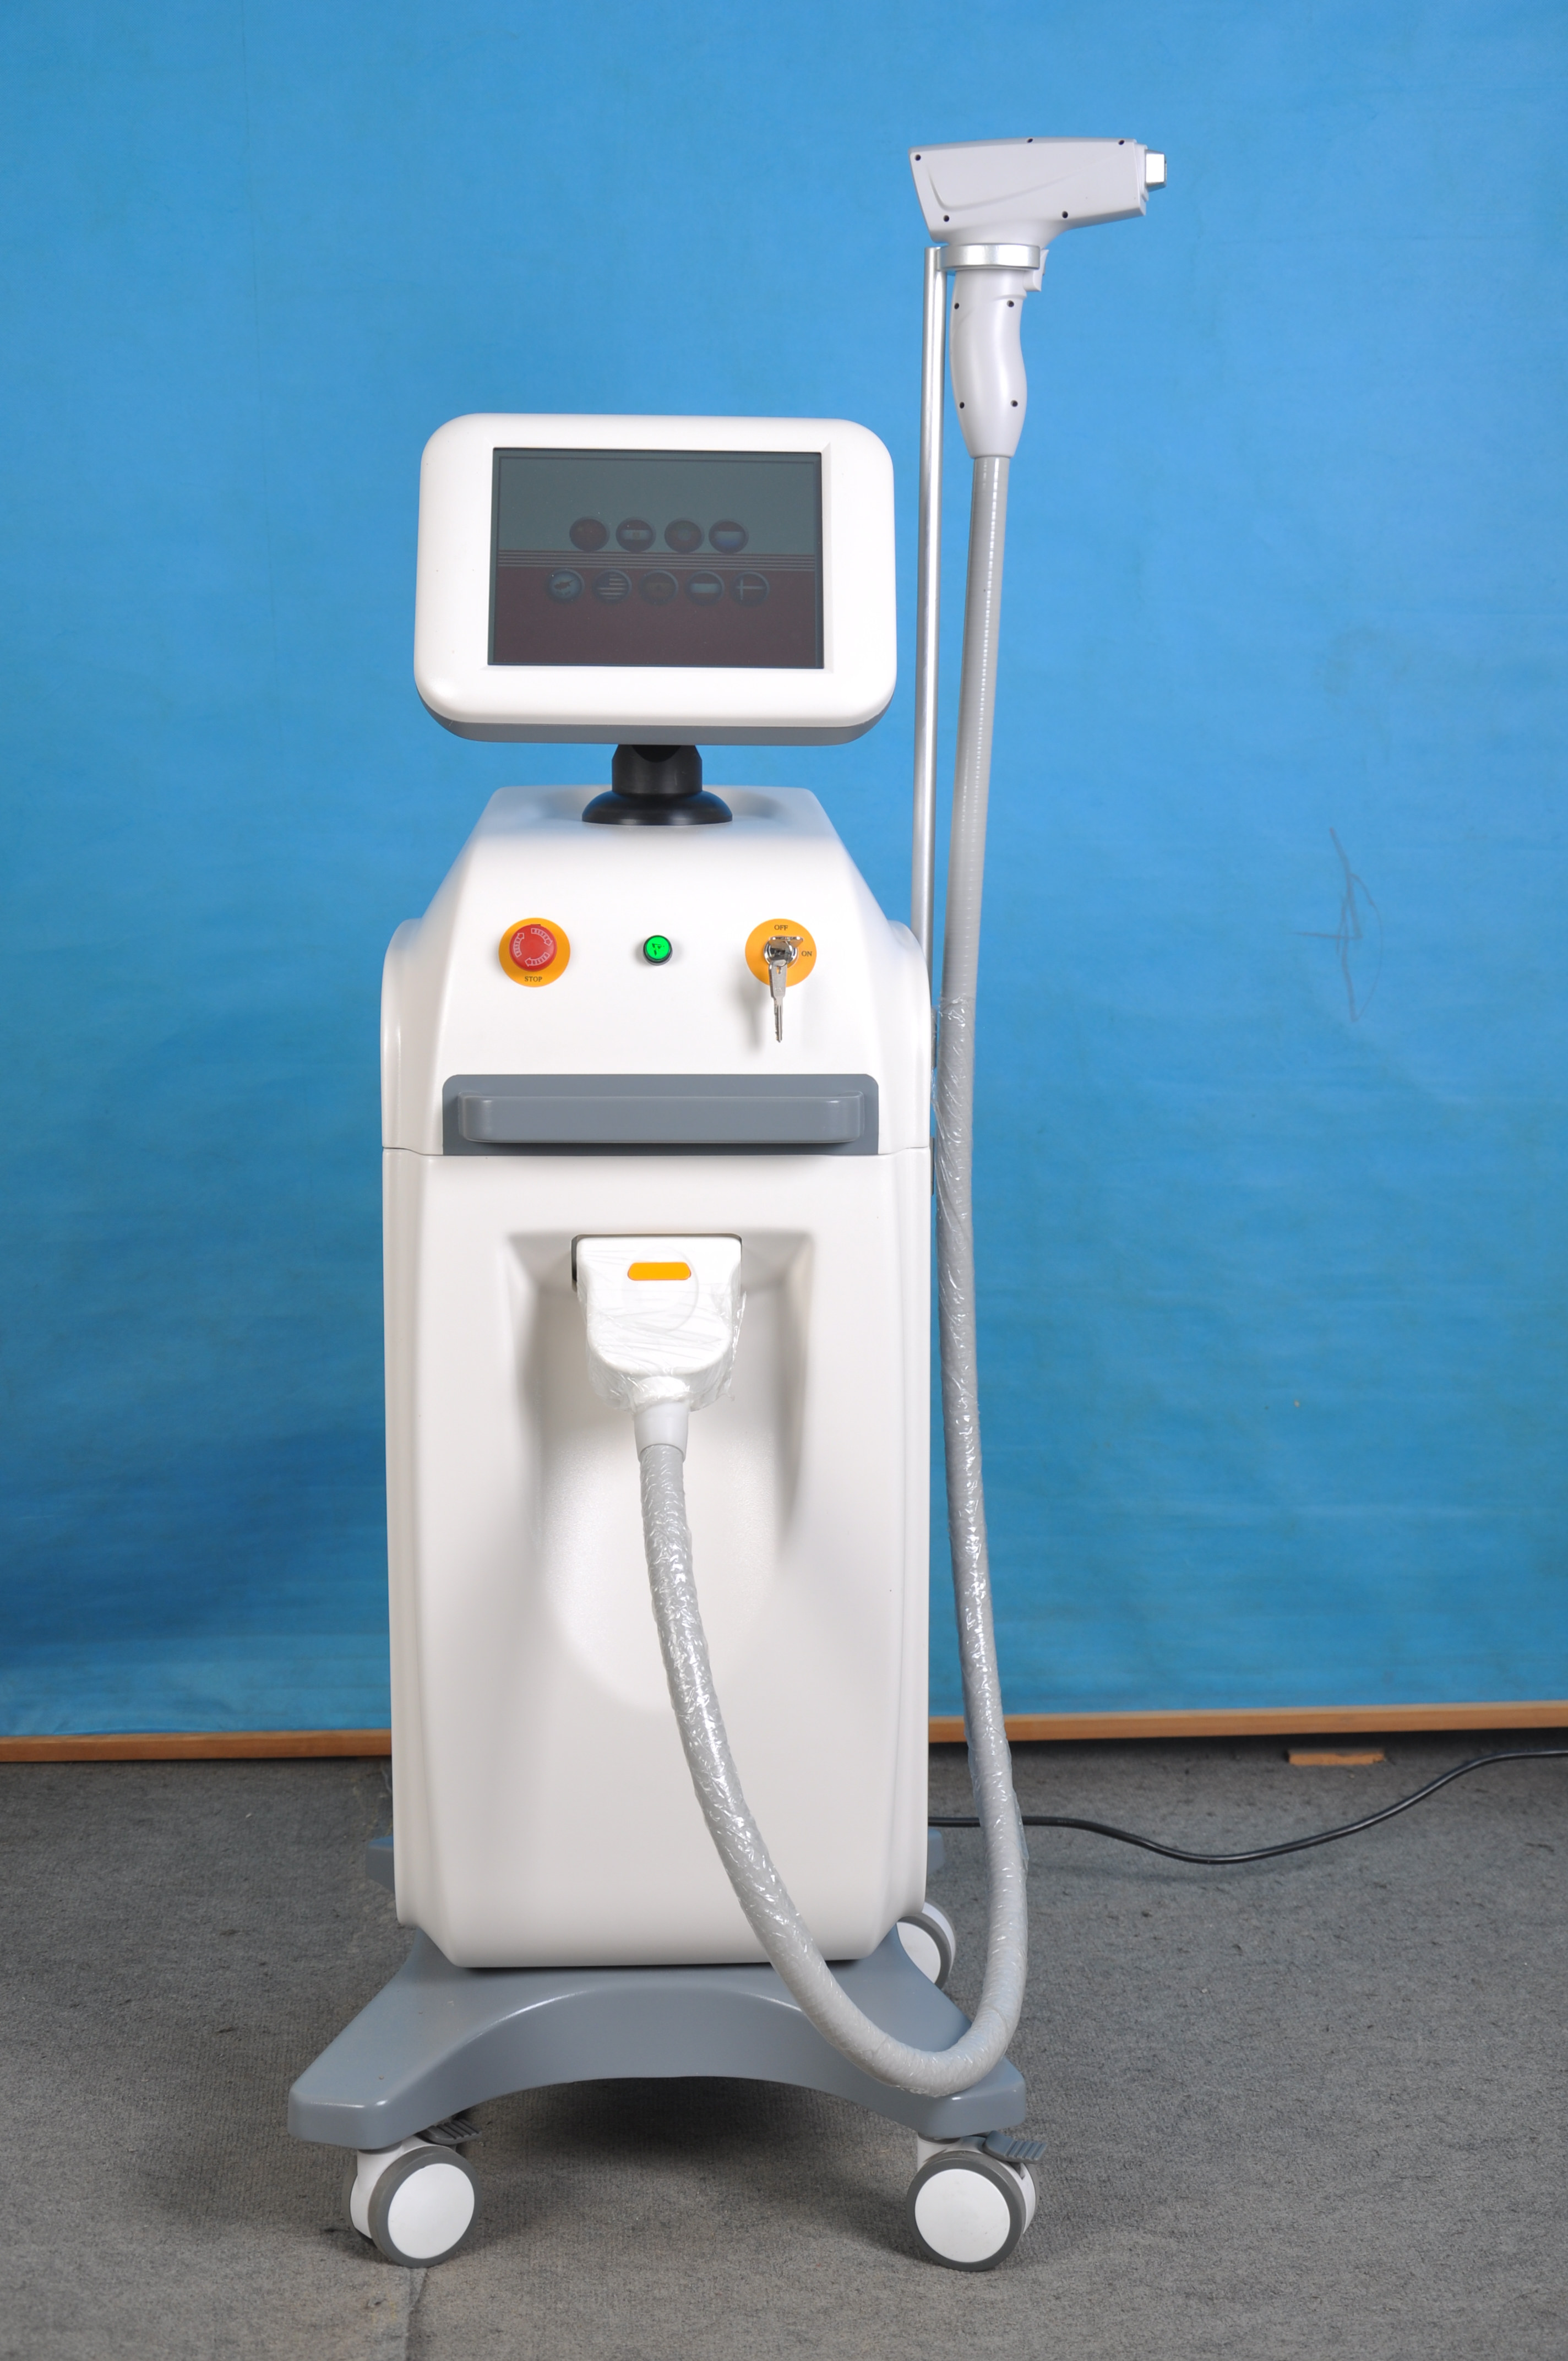 No pain hair removal 808nm diode laser permanent hair removal equipment 808nm diode laser machine